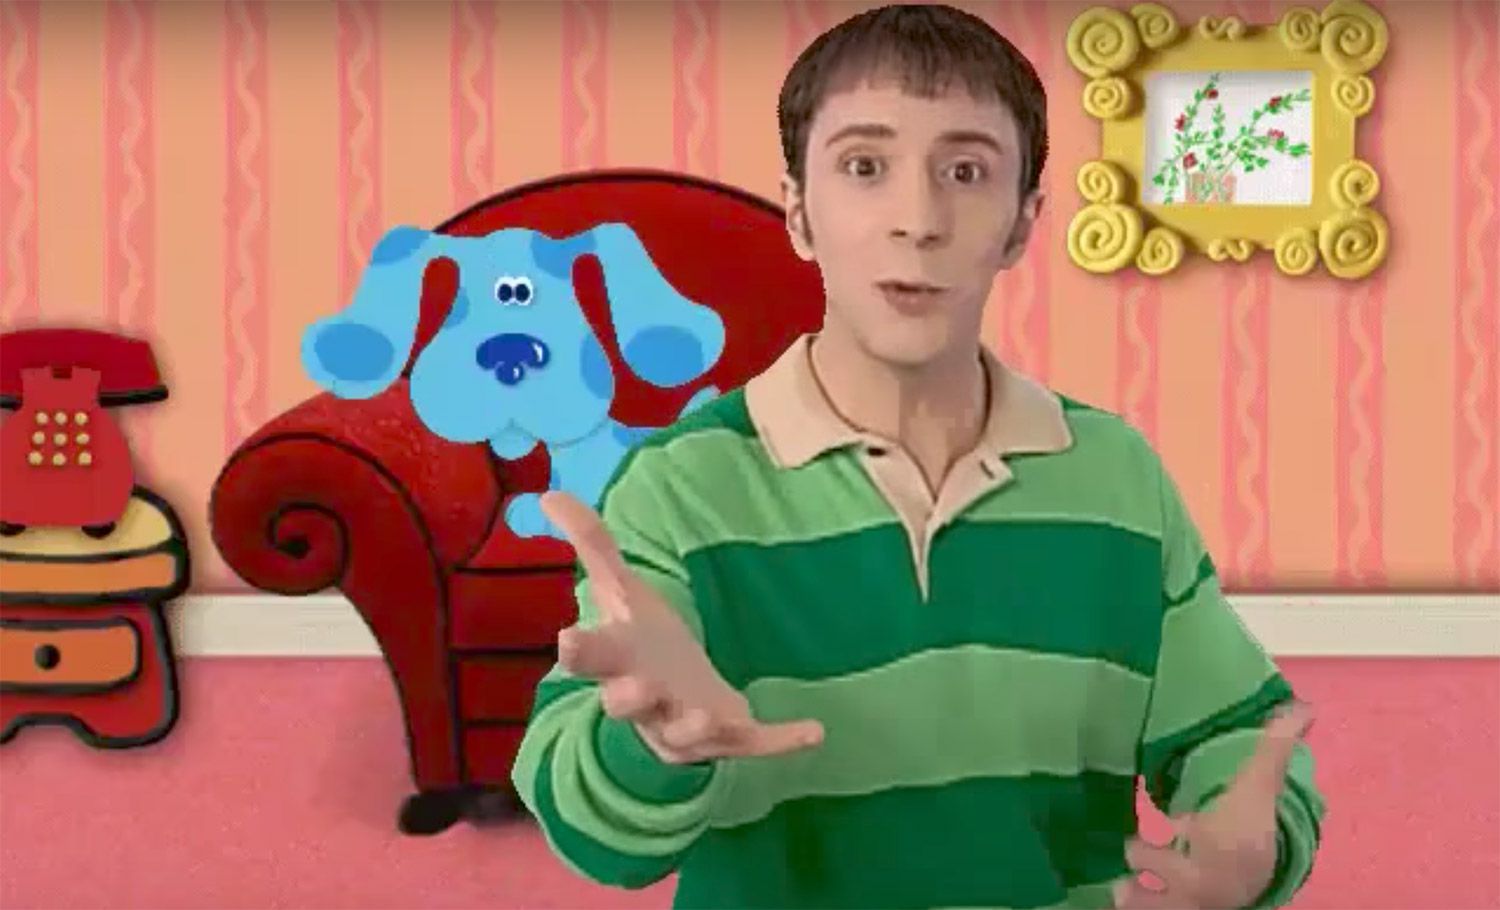 Blues Clues’ Steve sends the internet sobbing with a tender message to friends